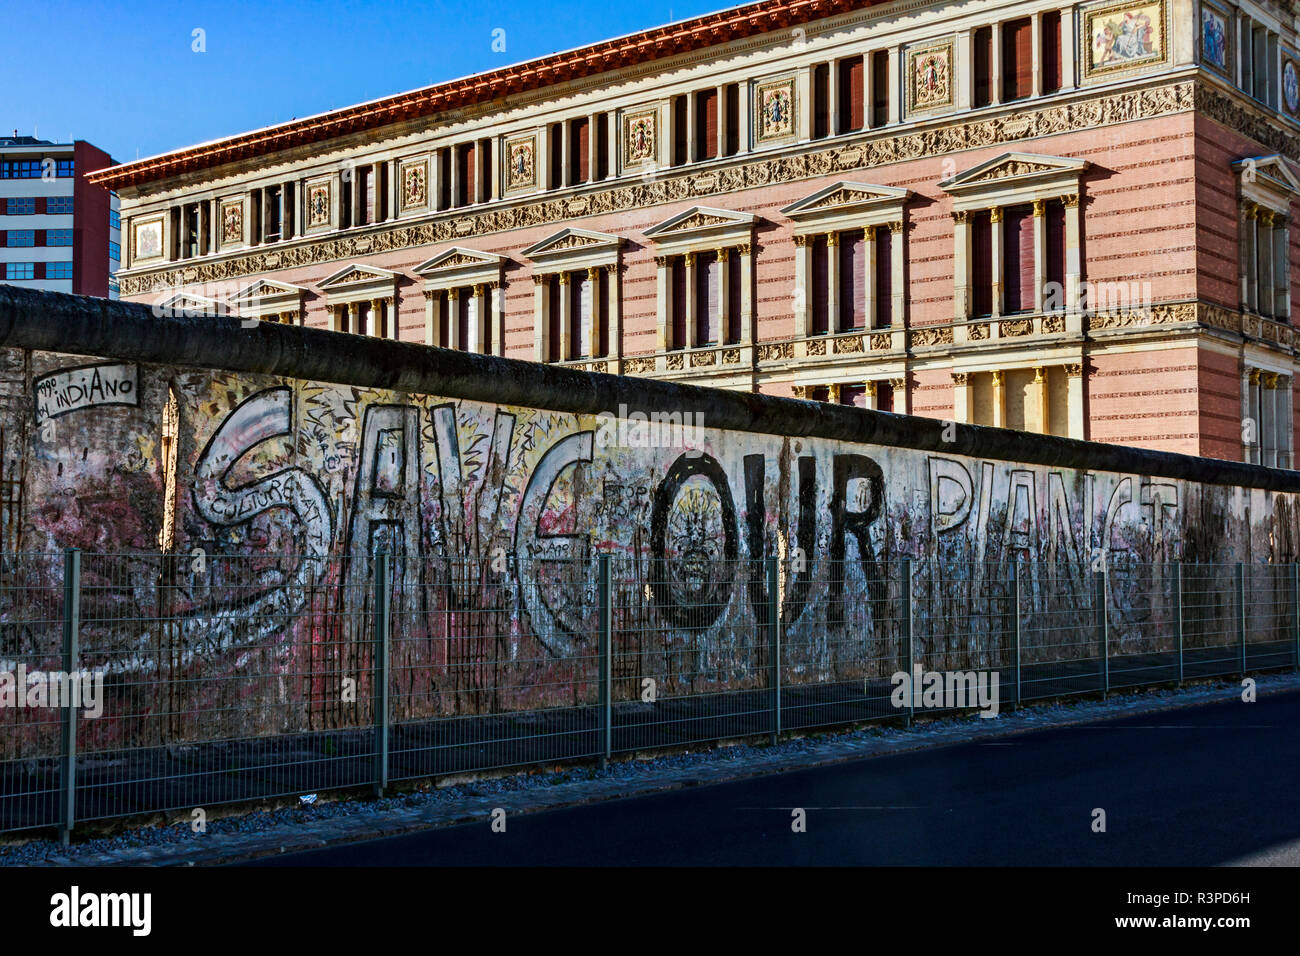 Berlin, Germany. Permanent outdoor exhibit at the Topography of Terror historical museum, site of former Gestapo headquarters, by ruins of Berlin Wall Stock Photo